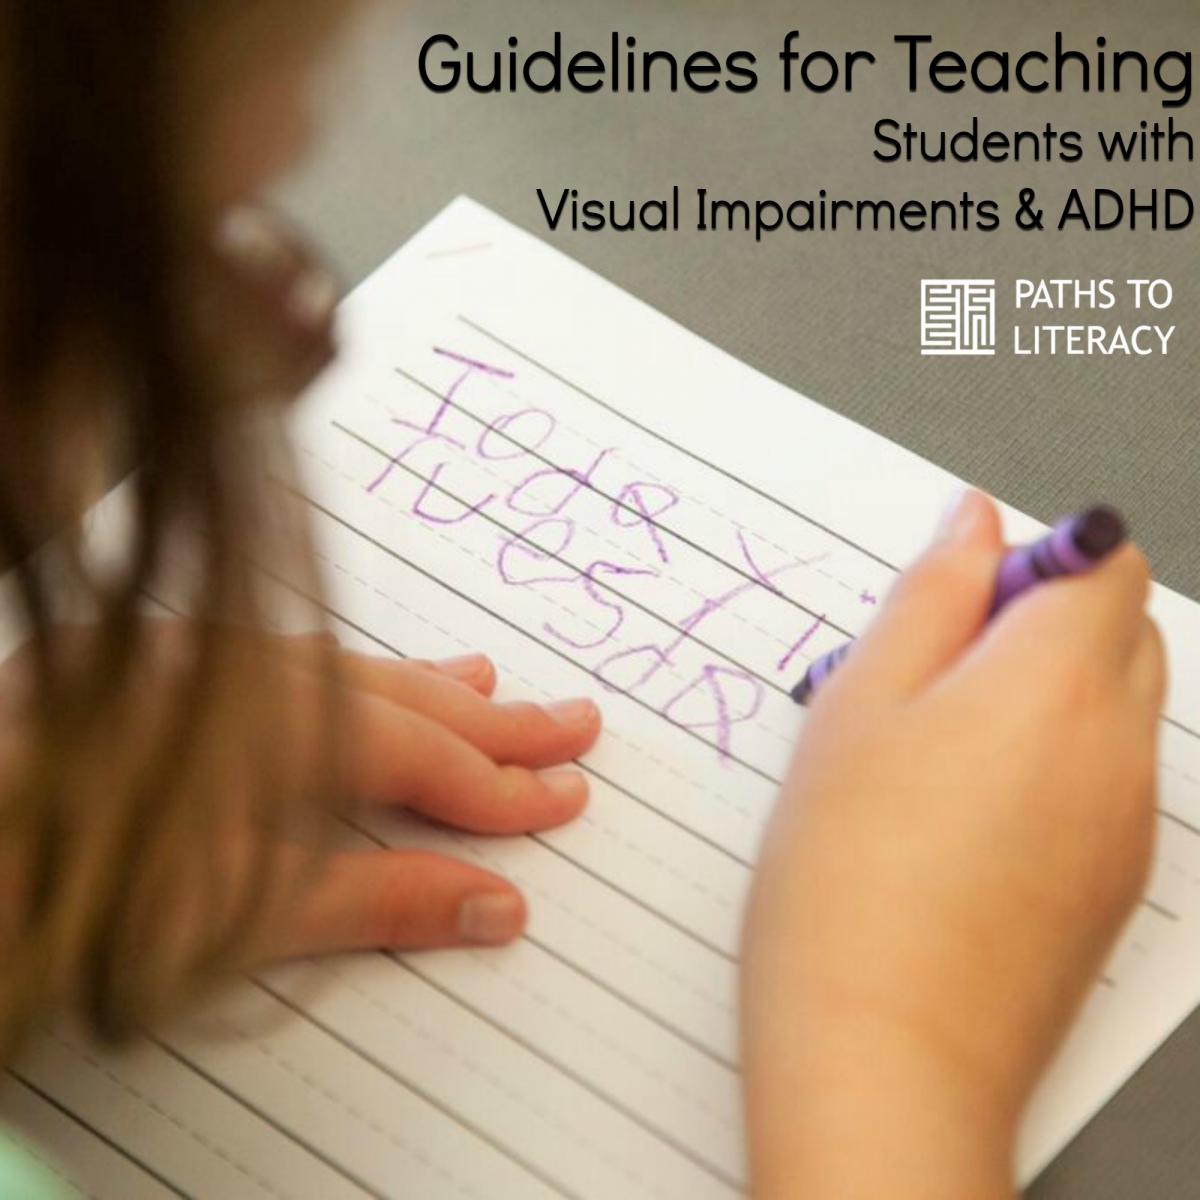 Guidelines for teaching students with visual impairments and ADHD - collage